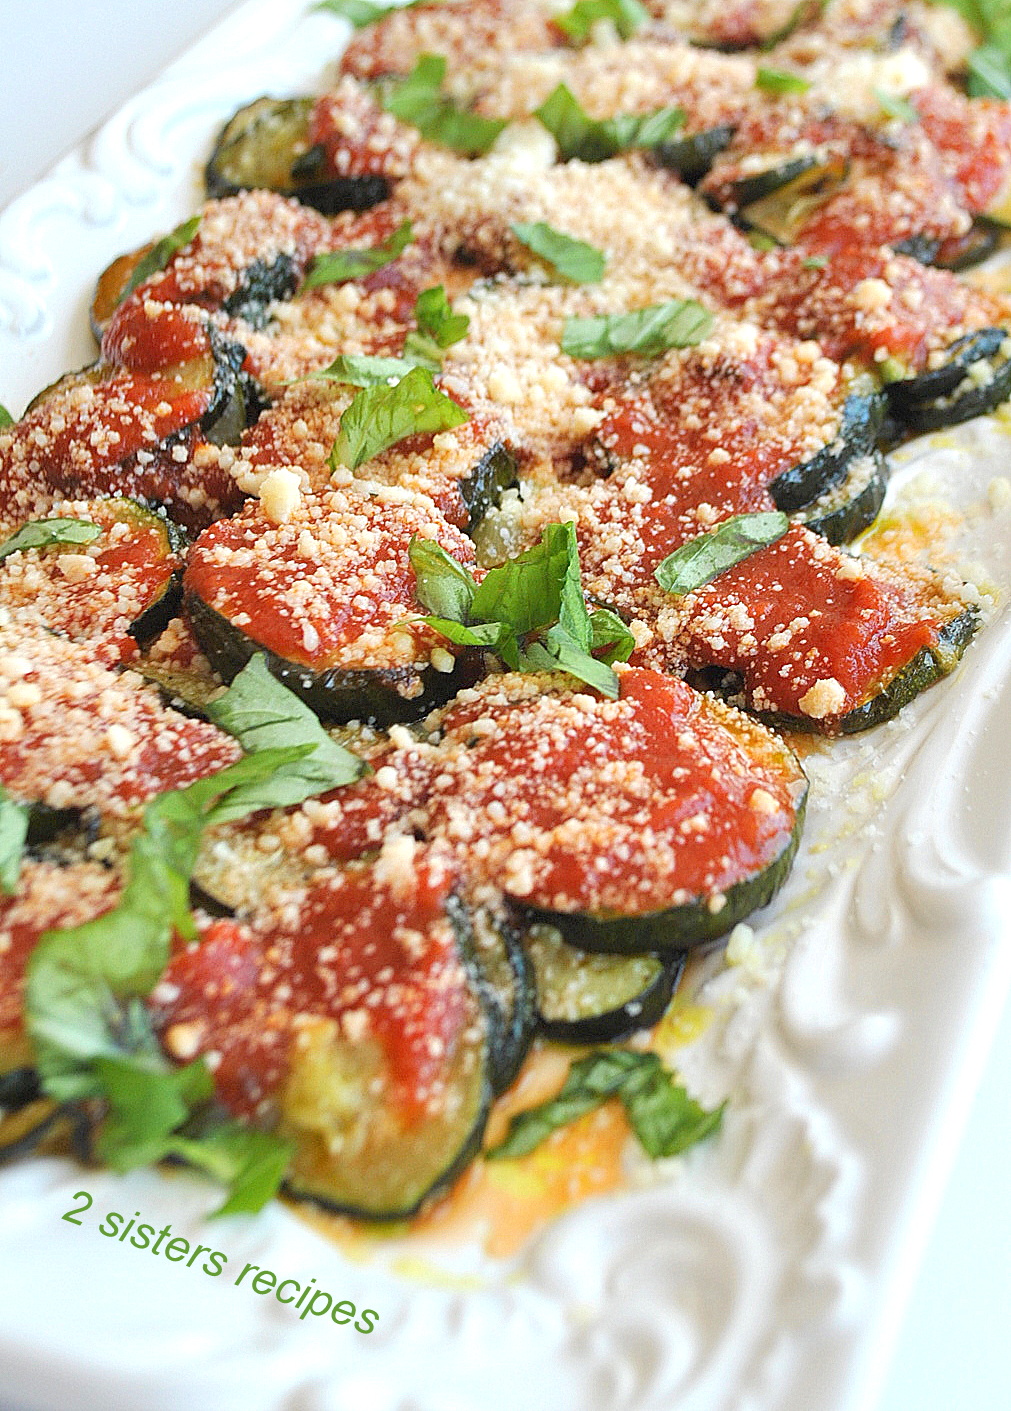 Roasted Zucchini Parmesan Lightened by 2sistersrecipes.com